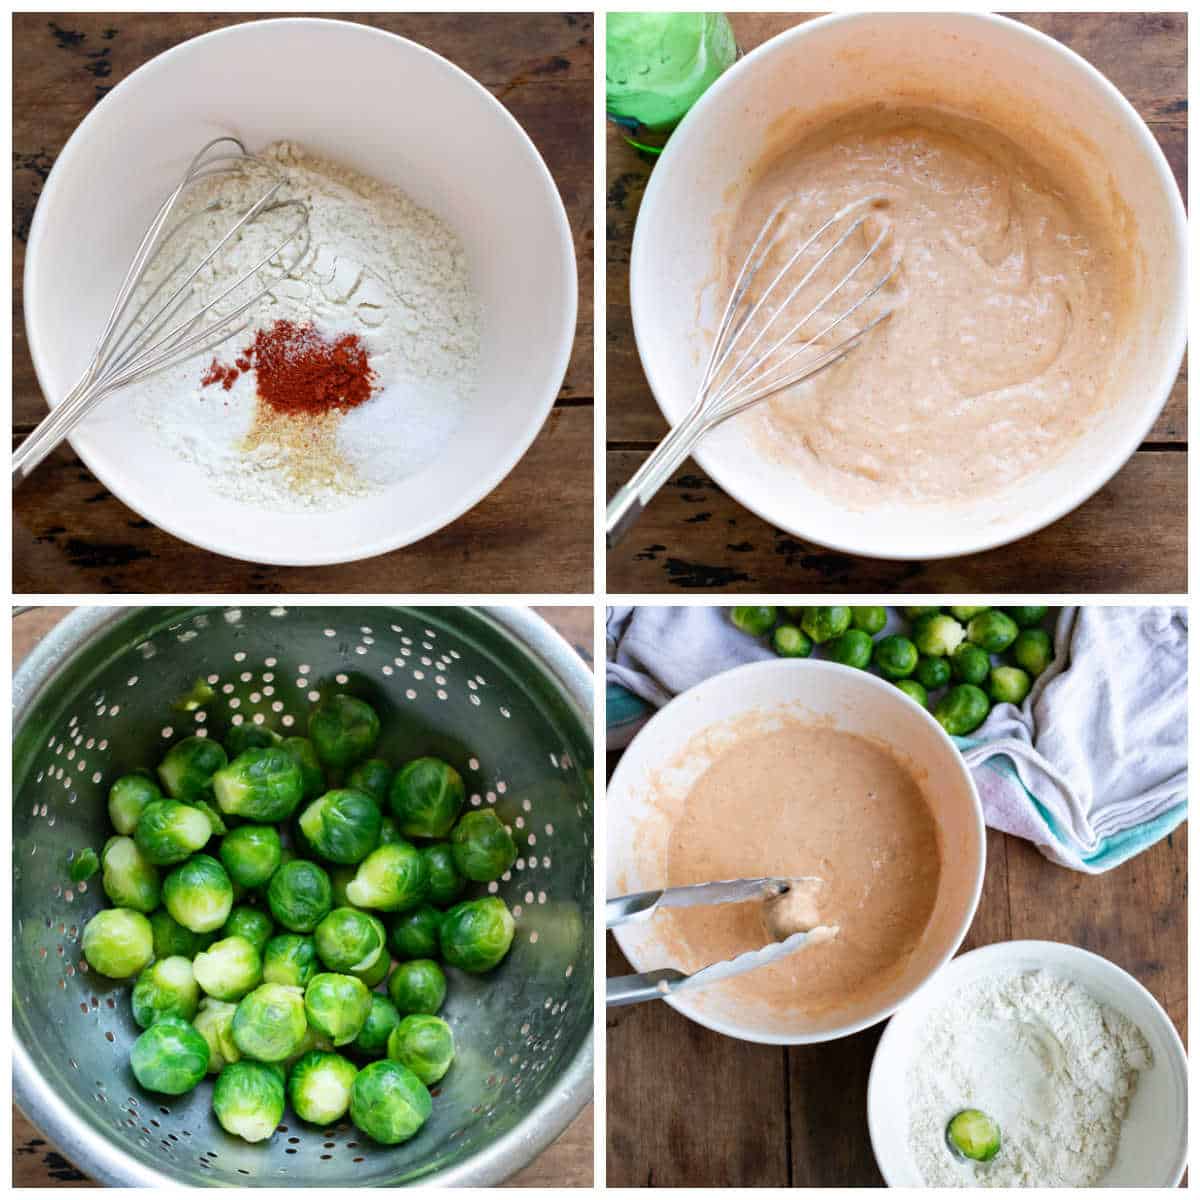 Mixing batter and dipping sprouts in it.